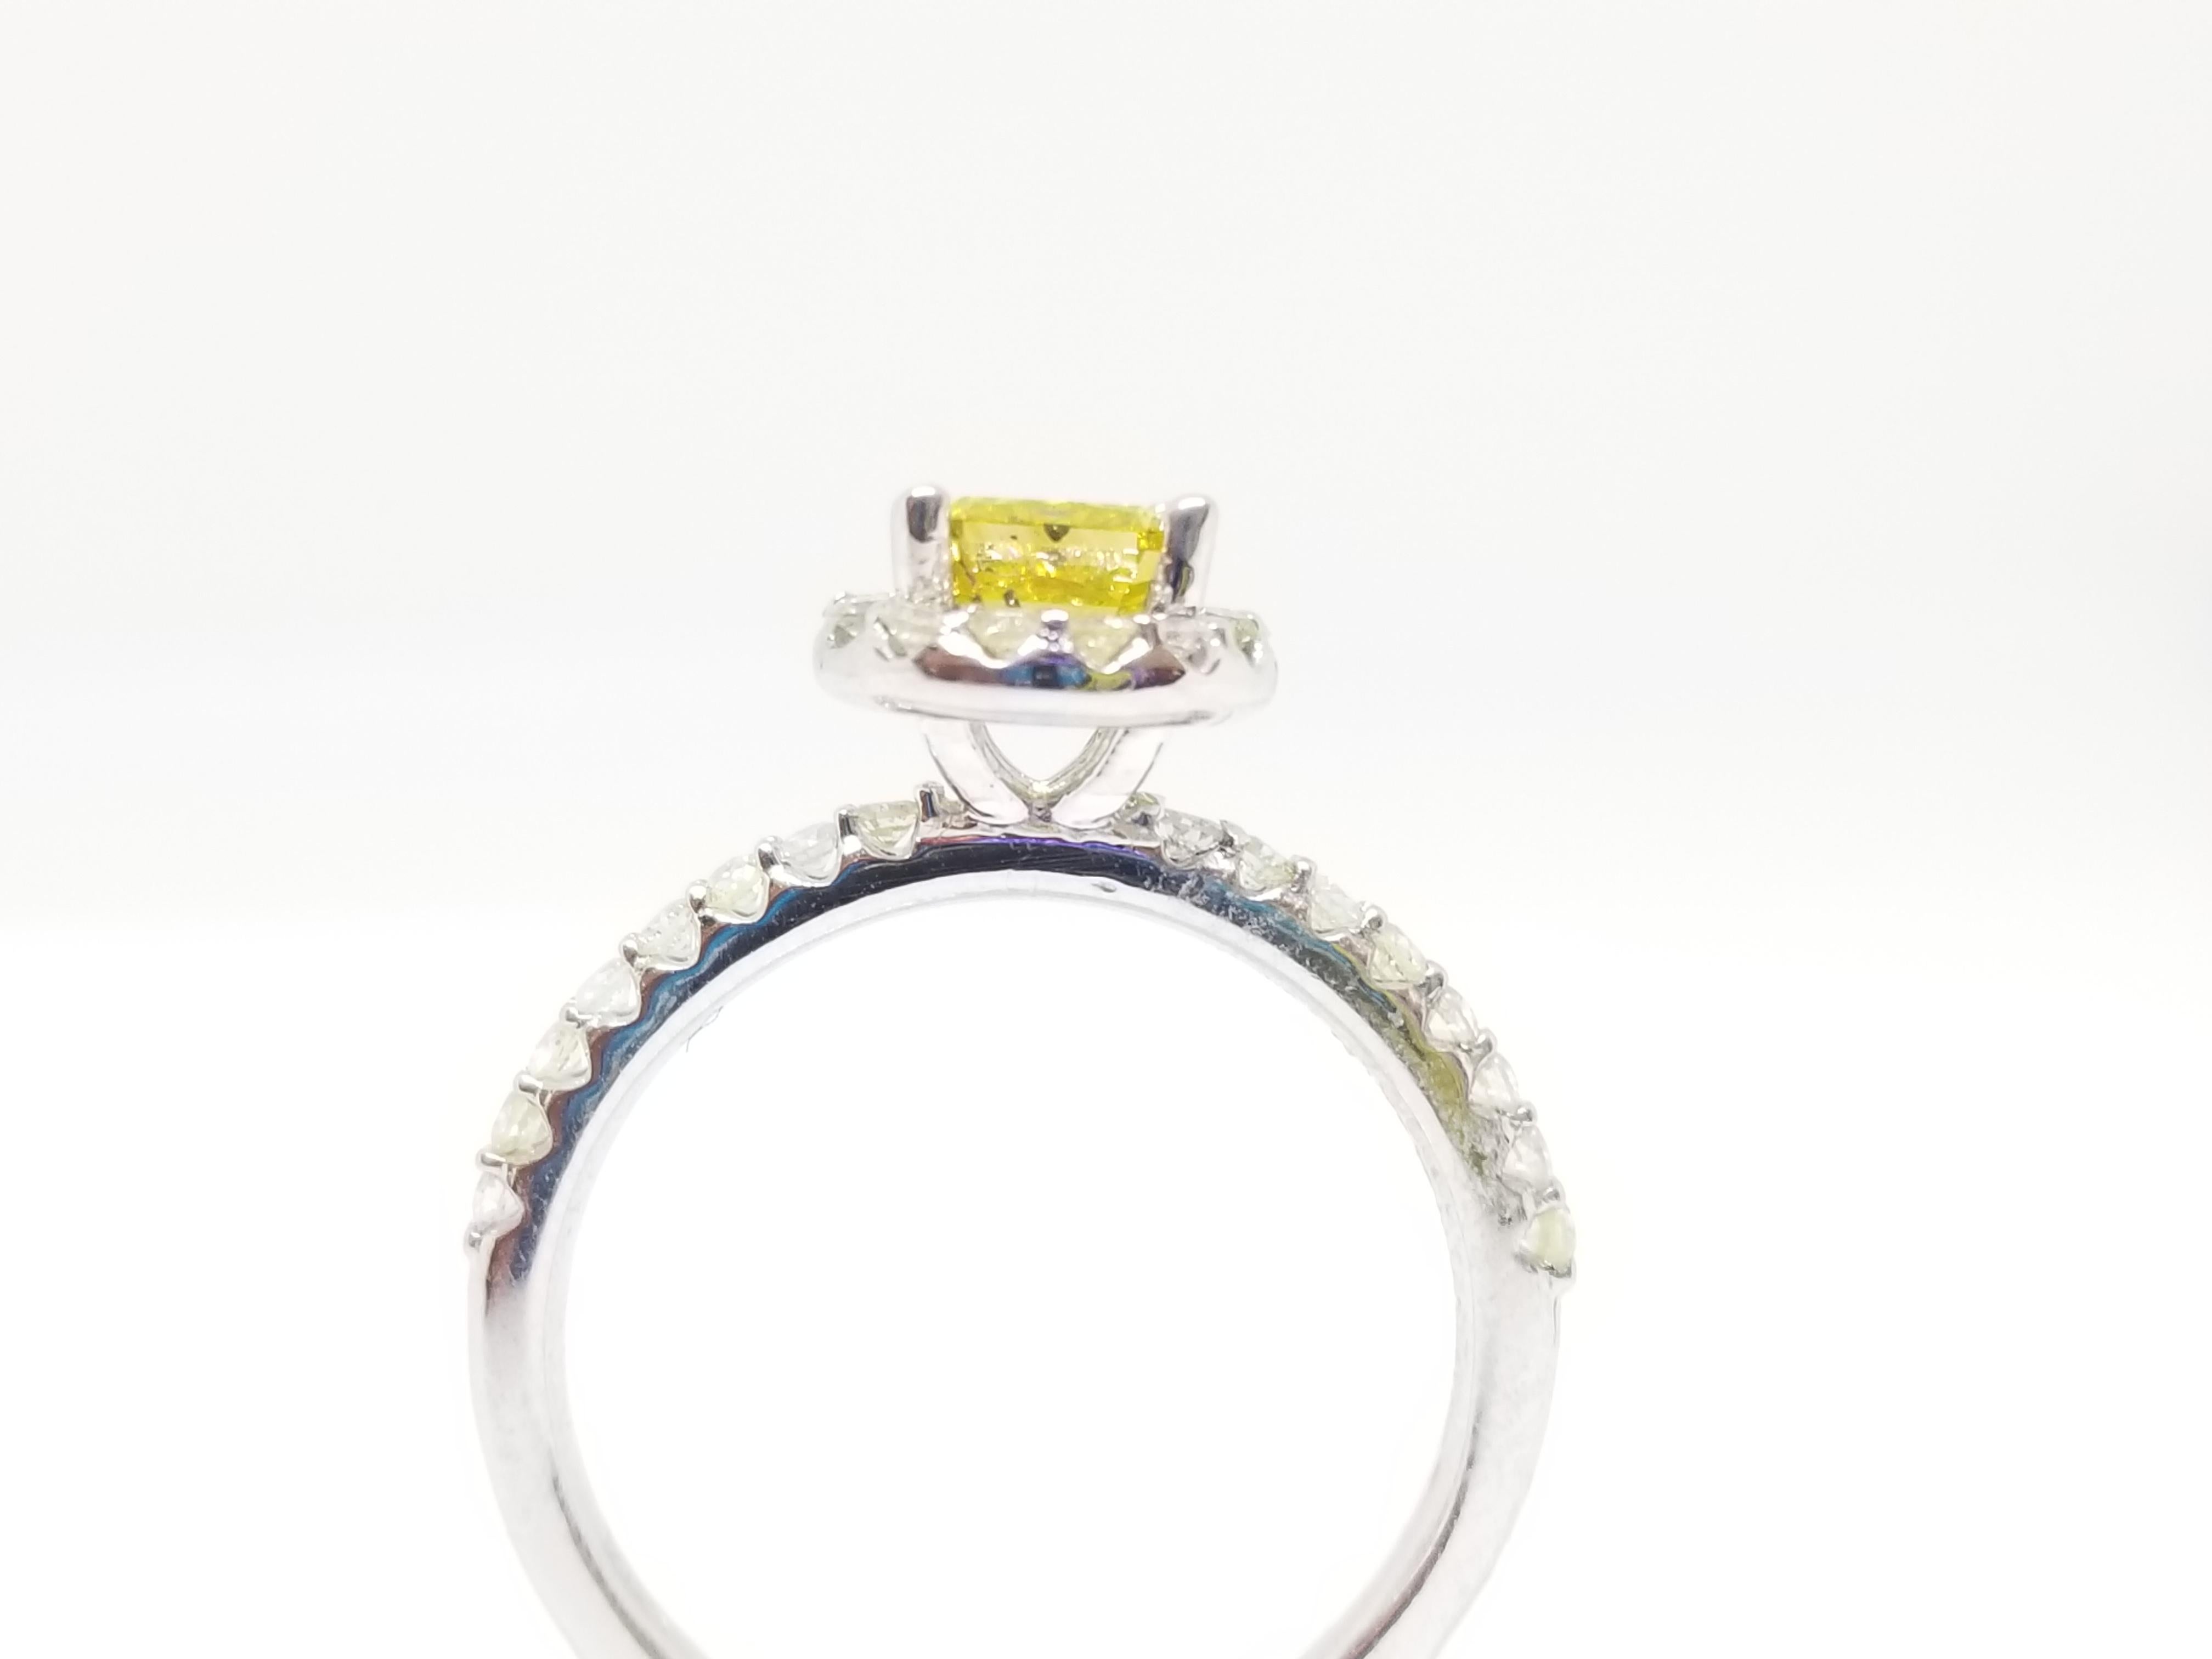 Fancy vivid yellow radiant cut natural diamond weighing 0.78 carats by GIA. surrounded by paved white diamonds in the halo setting. Its transparency and luster are excellent. set on 14K white gold, this pear ring is the ultimate gift for